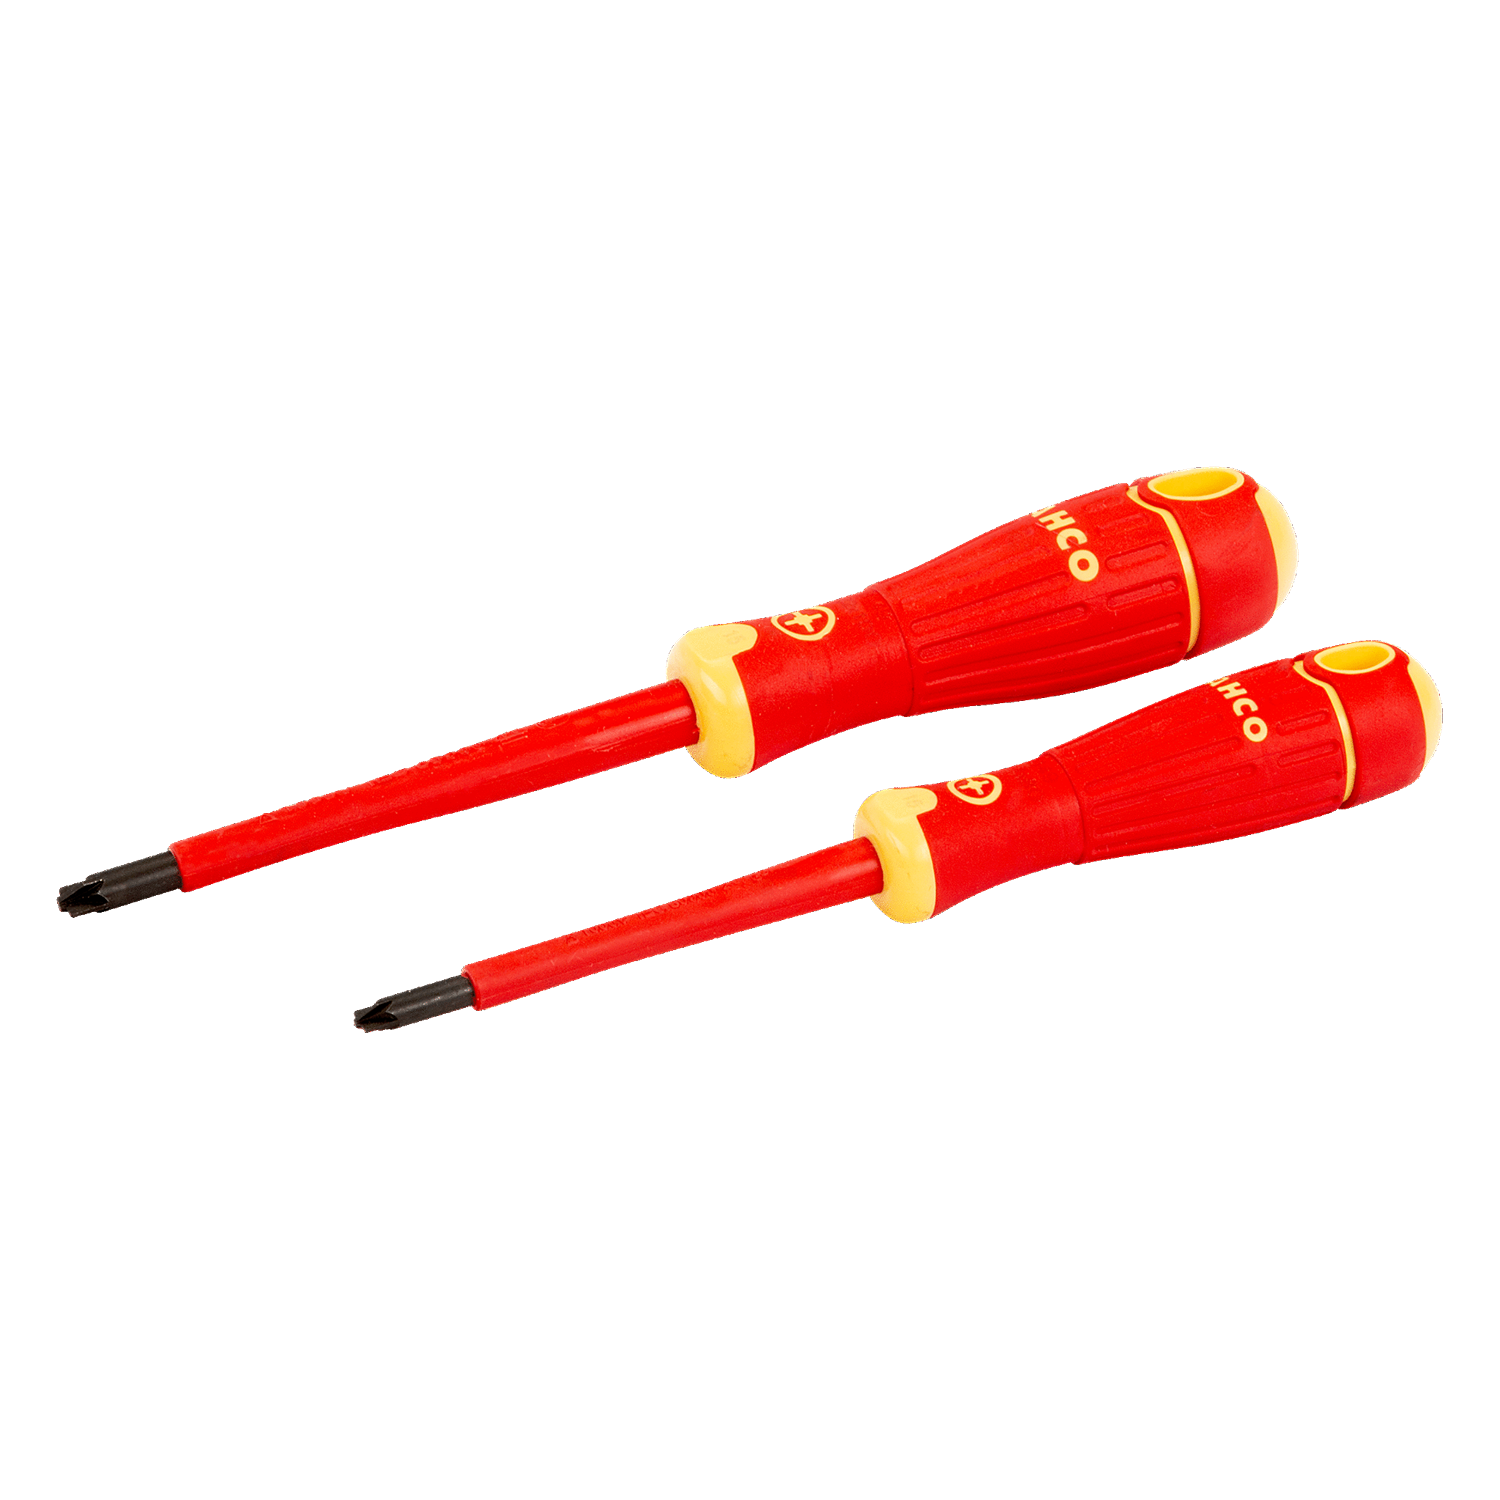 BAHCO B220.012 Insulated Screwdriver Set Slotted/Pozidriv - 2 pcs - Premium Insulated Screwdriver Set from BAHCO - Shop now at Yew Aik.